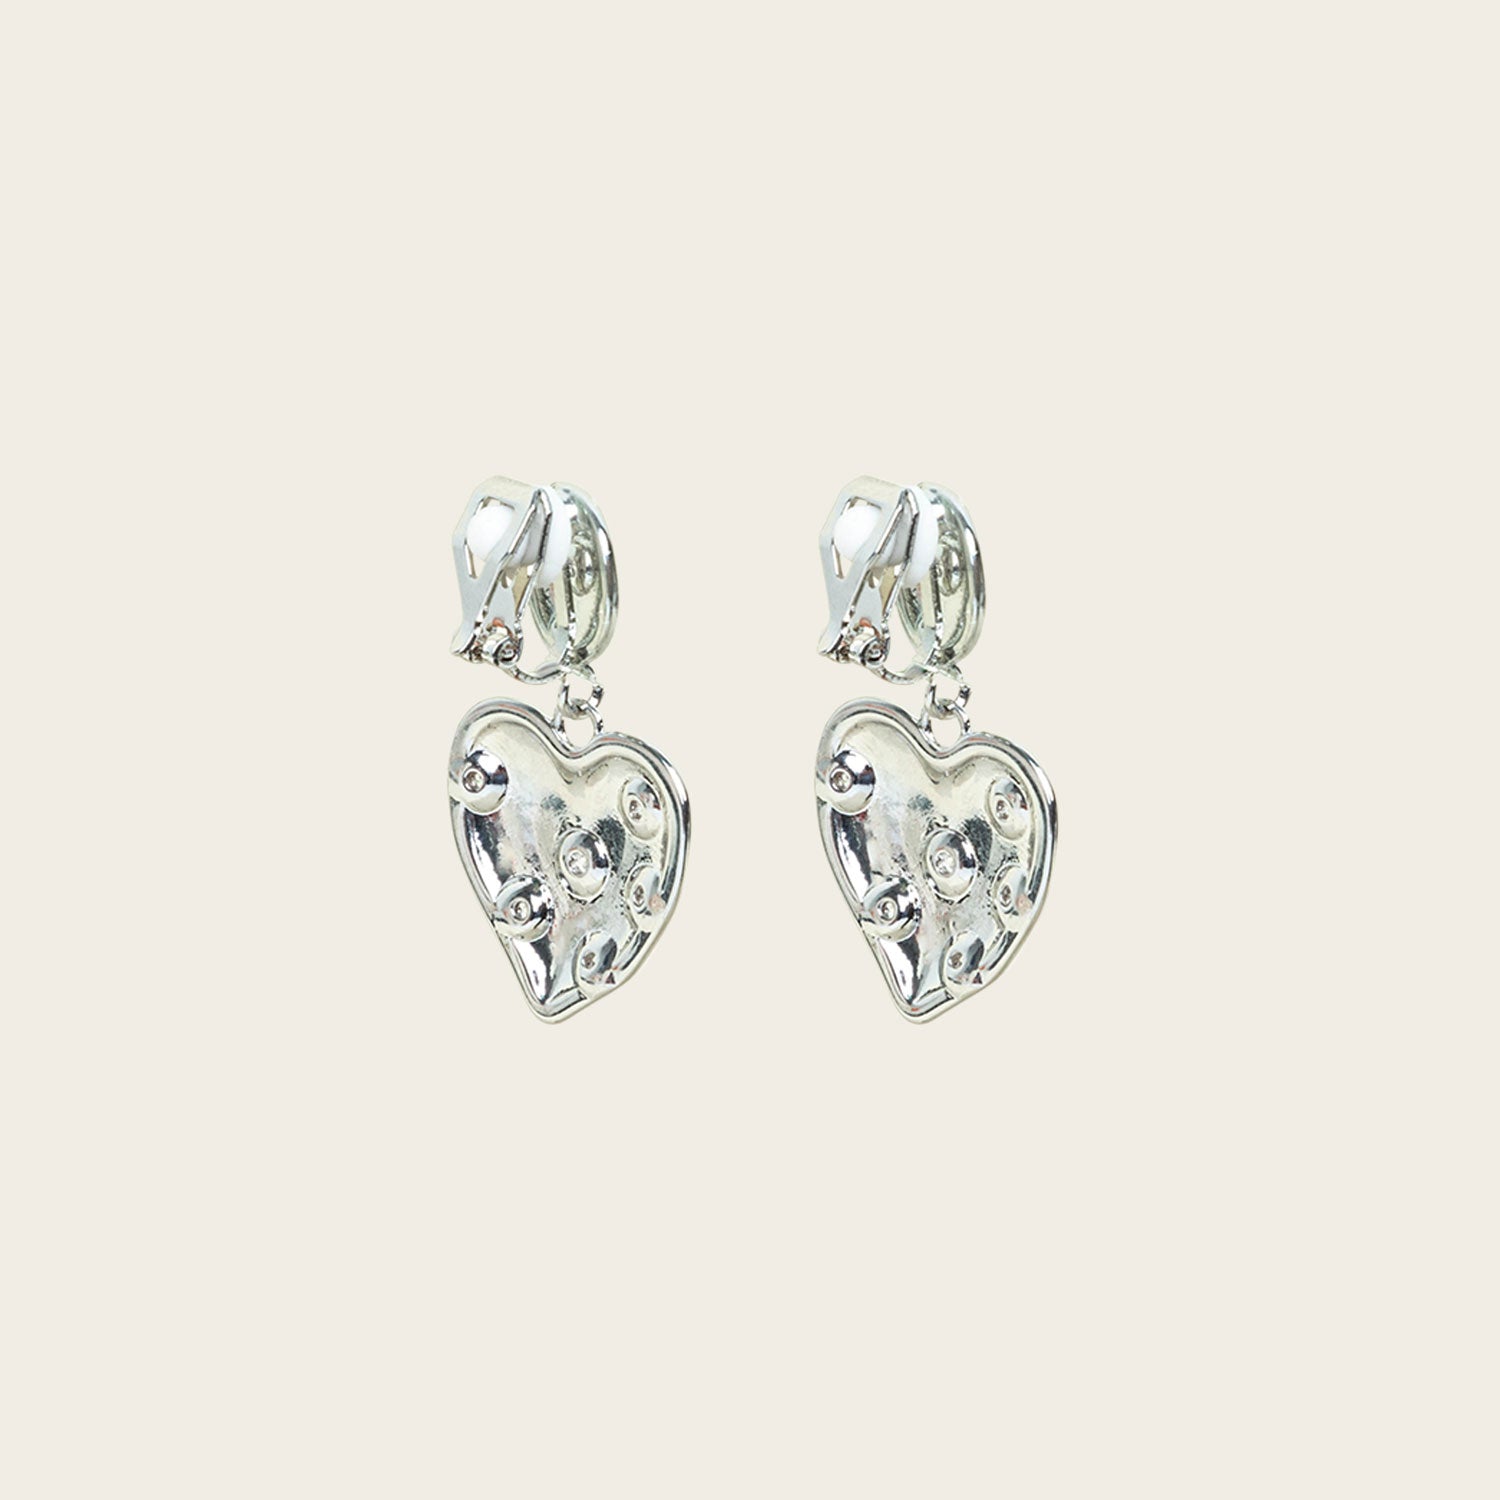 Image of the Amore Clip On Earrings in Silver offer a secure, padded closure type for a comfortable wear of 8-12 hours that is suitable for all ear types. This single pair features stainless steel and cubic zirconia construction and is non-tarnish and water resistant. Note: The clip-on earring has removable rubber padding.